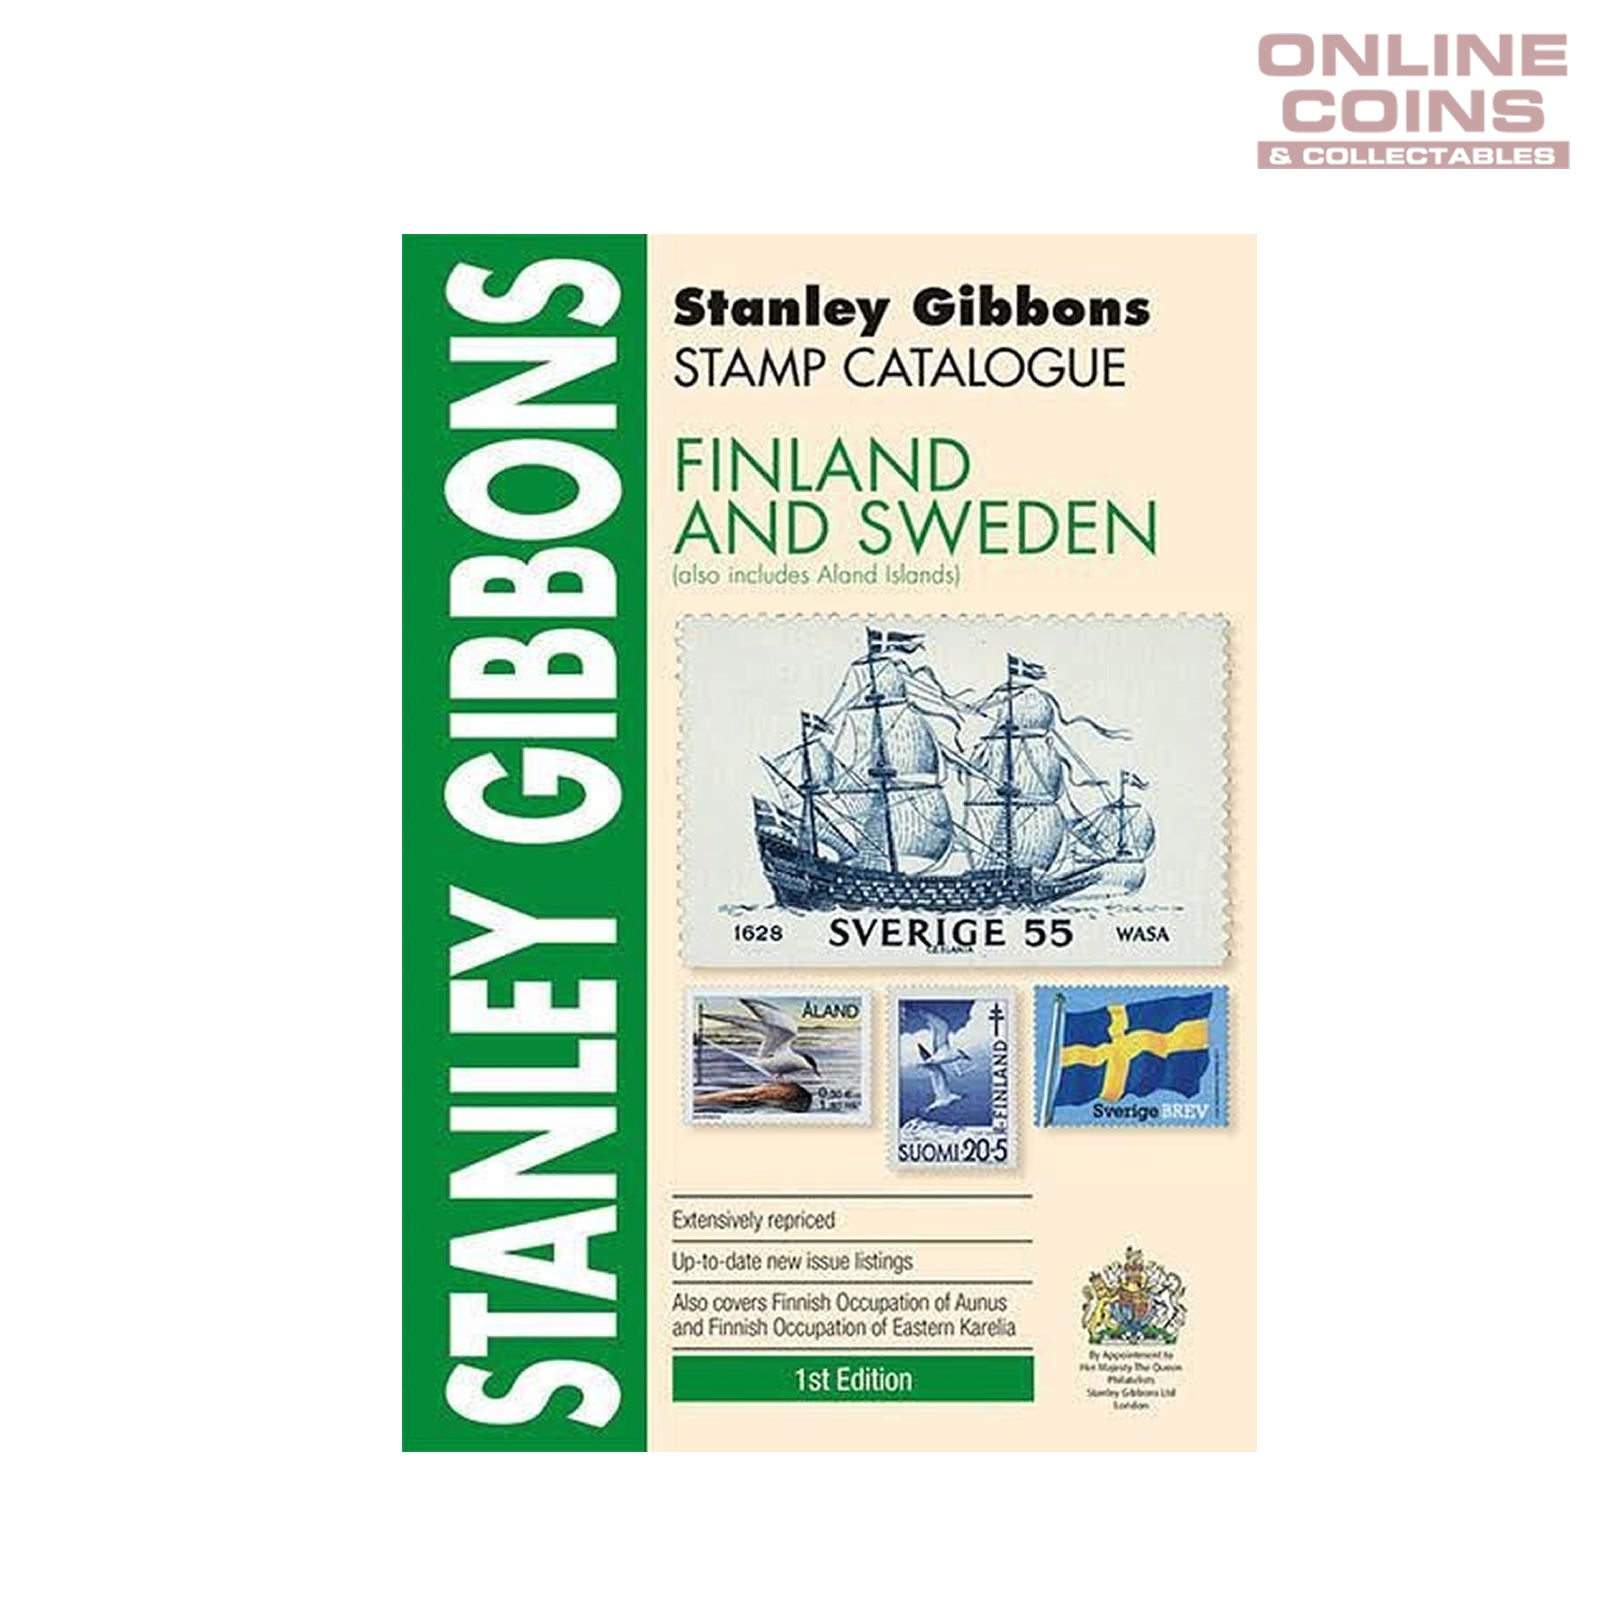 2017 Stanley Gibbons - Stamp Catalogue Finland and Sweden Soft Cover Book 1st Edition